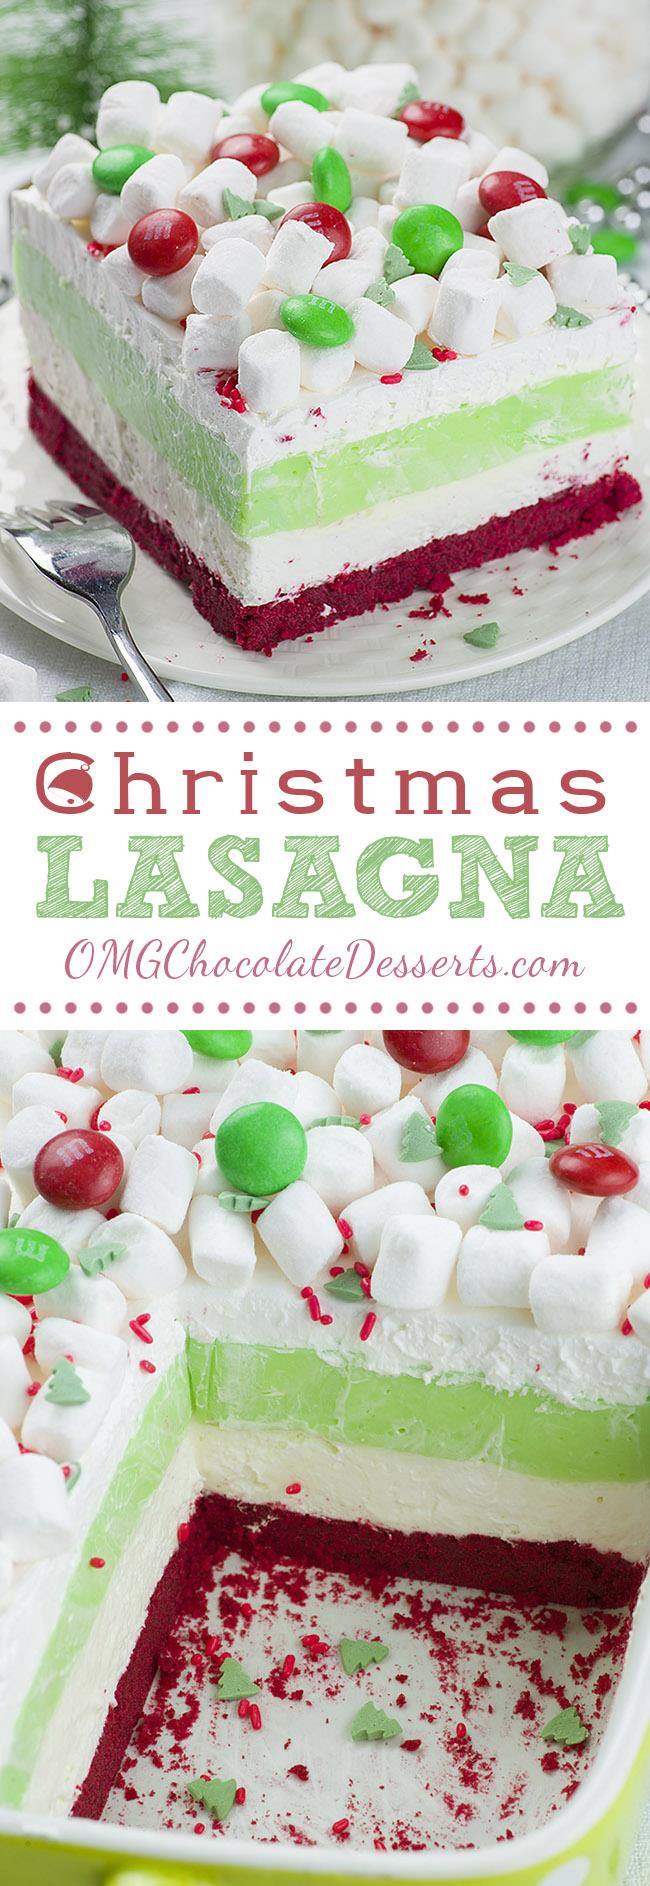 Christmas Desert - 5 Best Sugar-Free Christmas Desserts for a Healthy ... / This link is to an external site that may or may not meet accessibility.